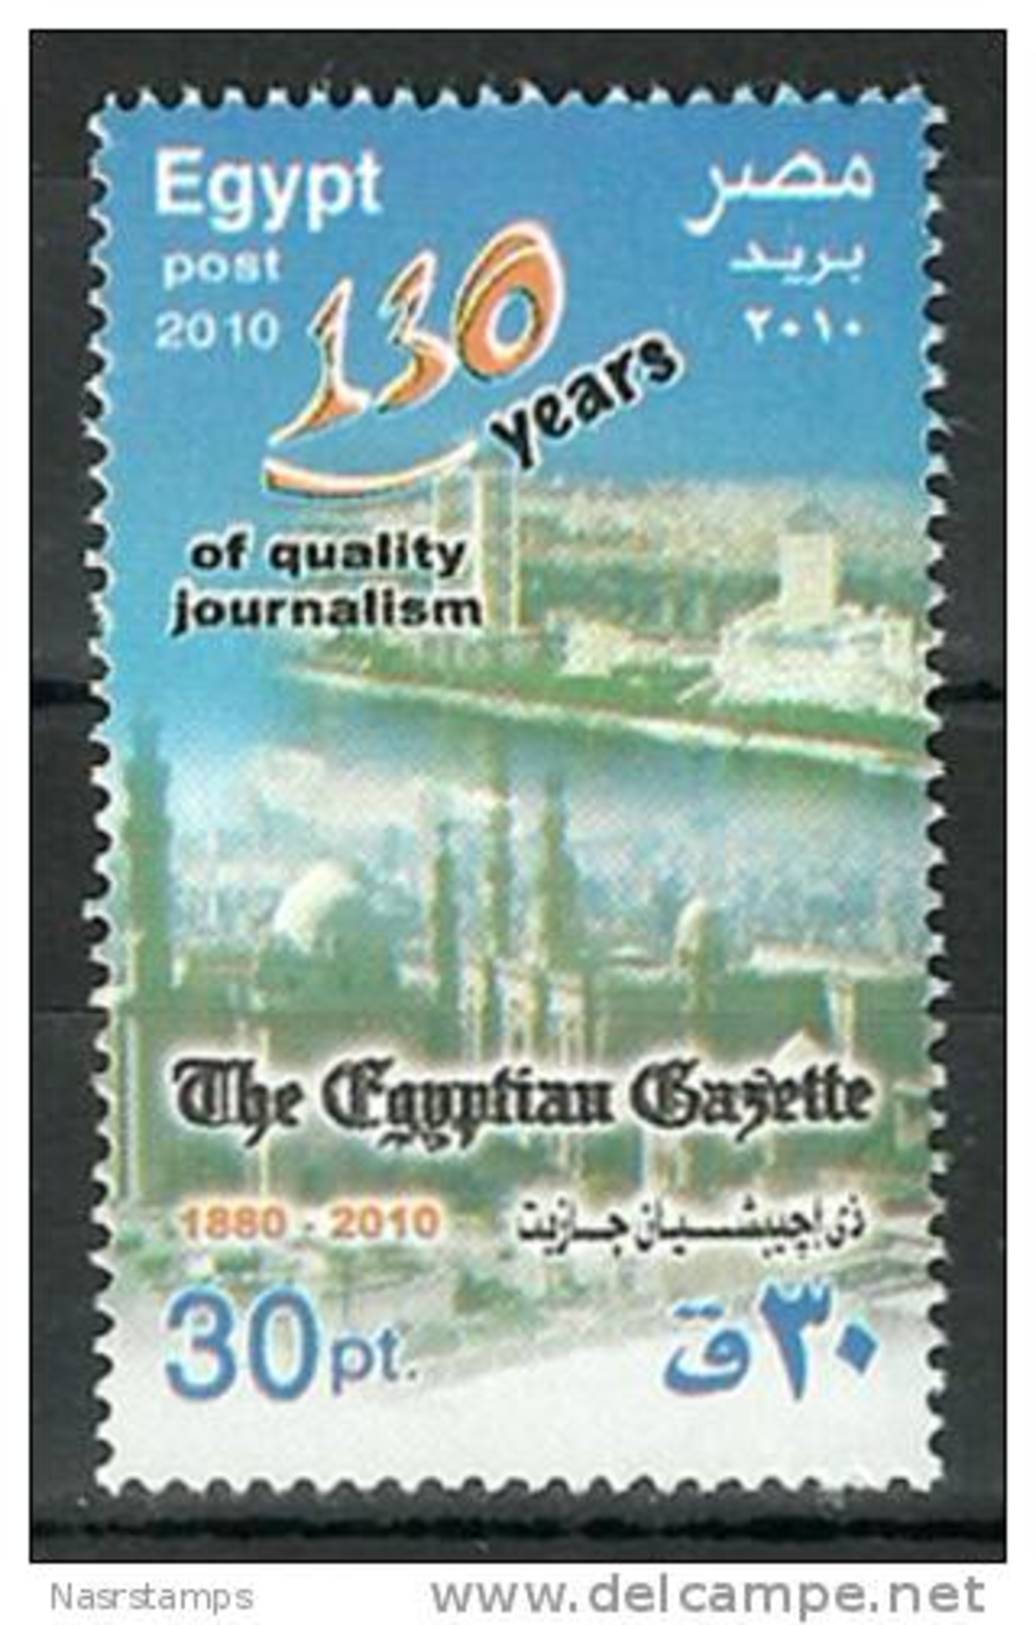 Egypt - 2010 - ( 130 Anniv. Of The Egyptian Gazette - Quality Journalism ) - MNH (**) - Unused Stamps